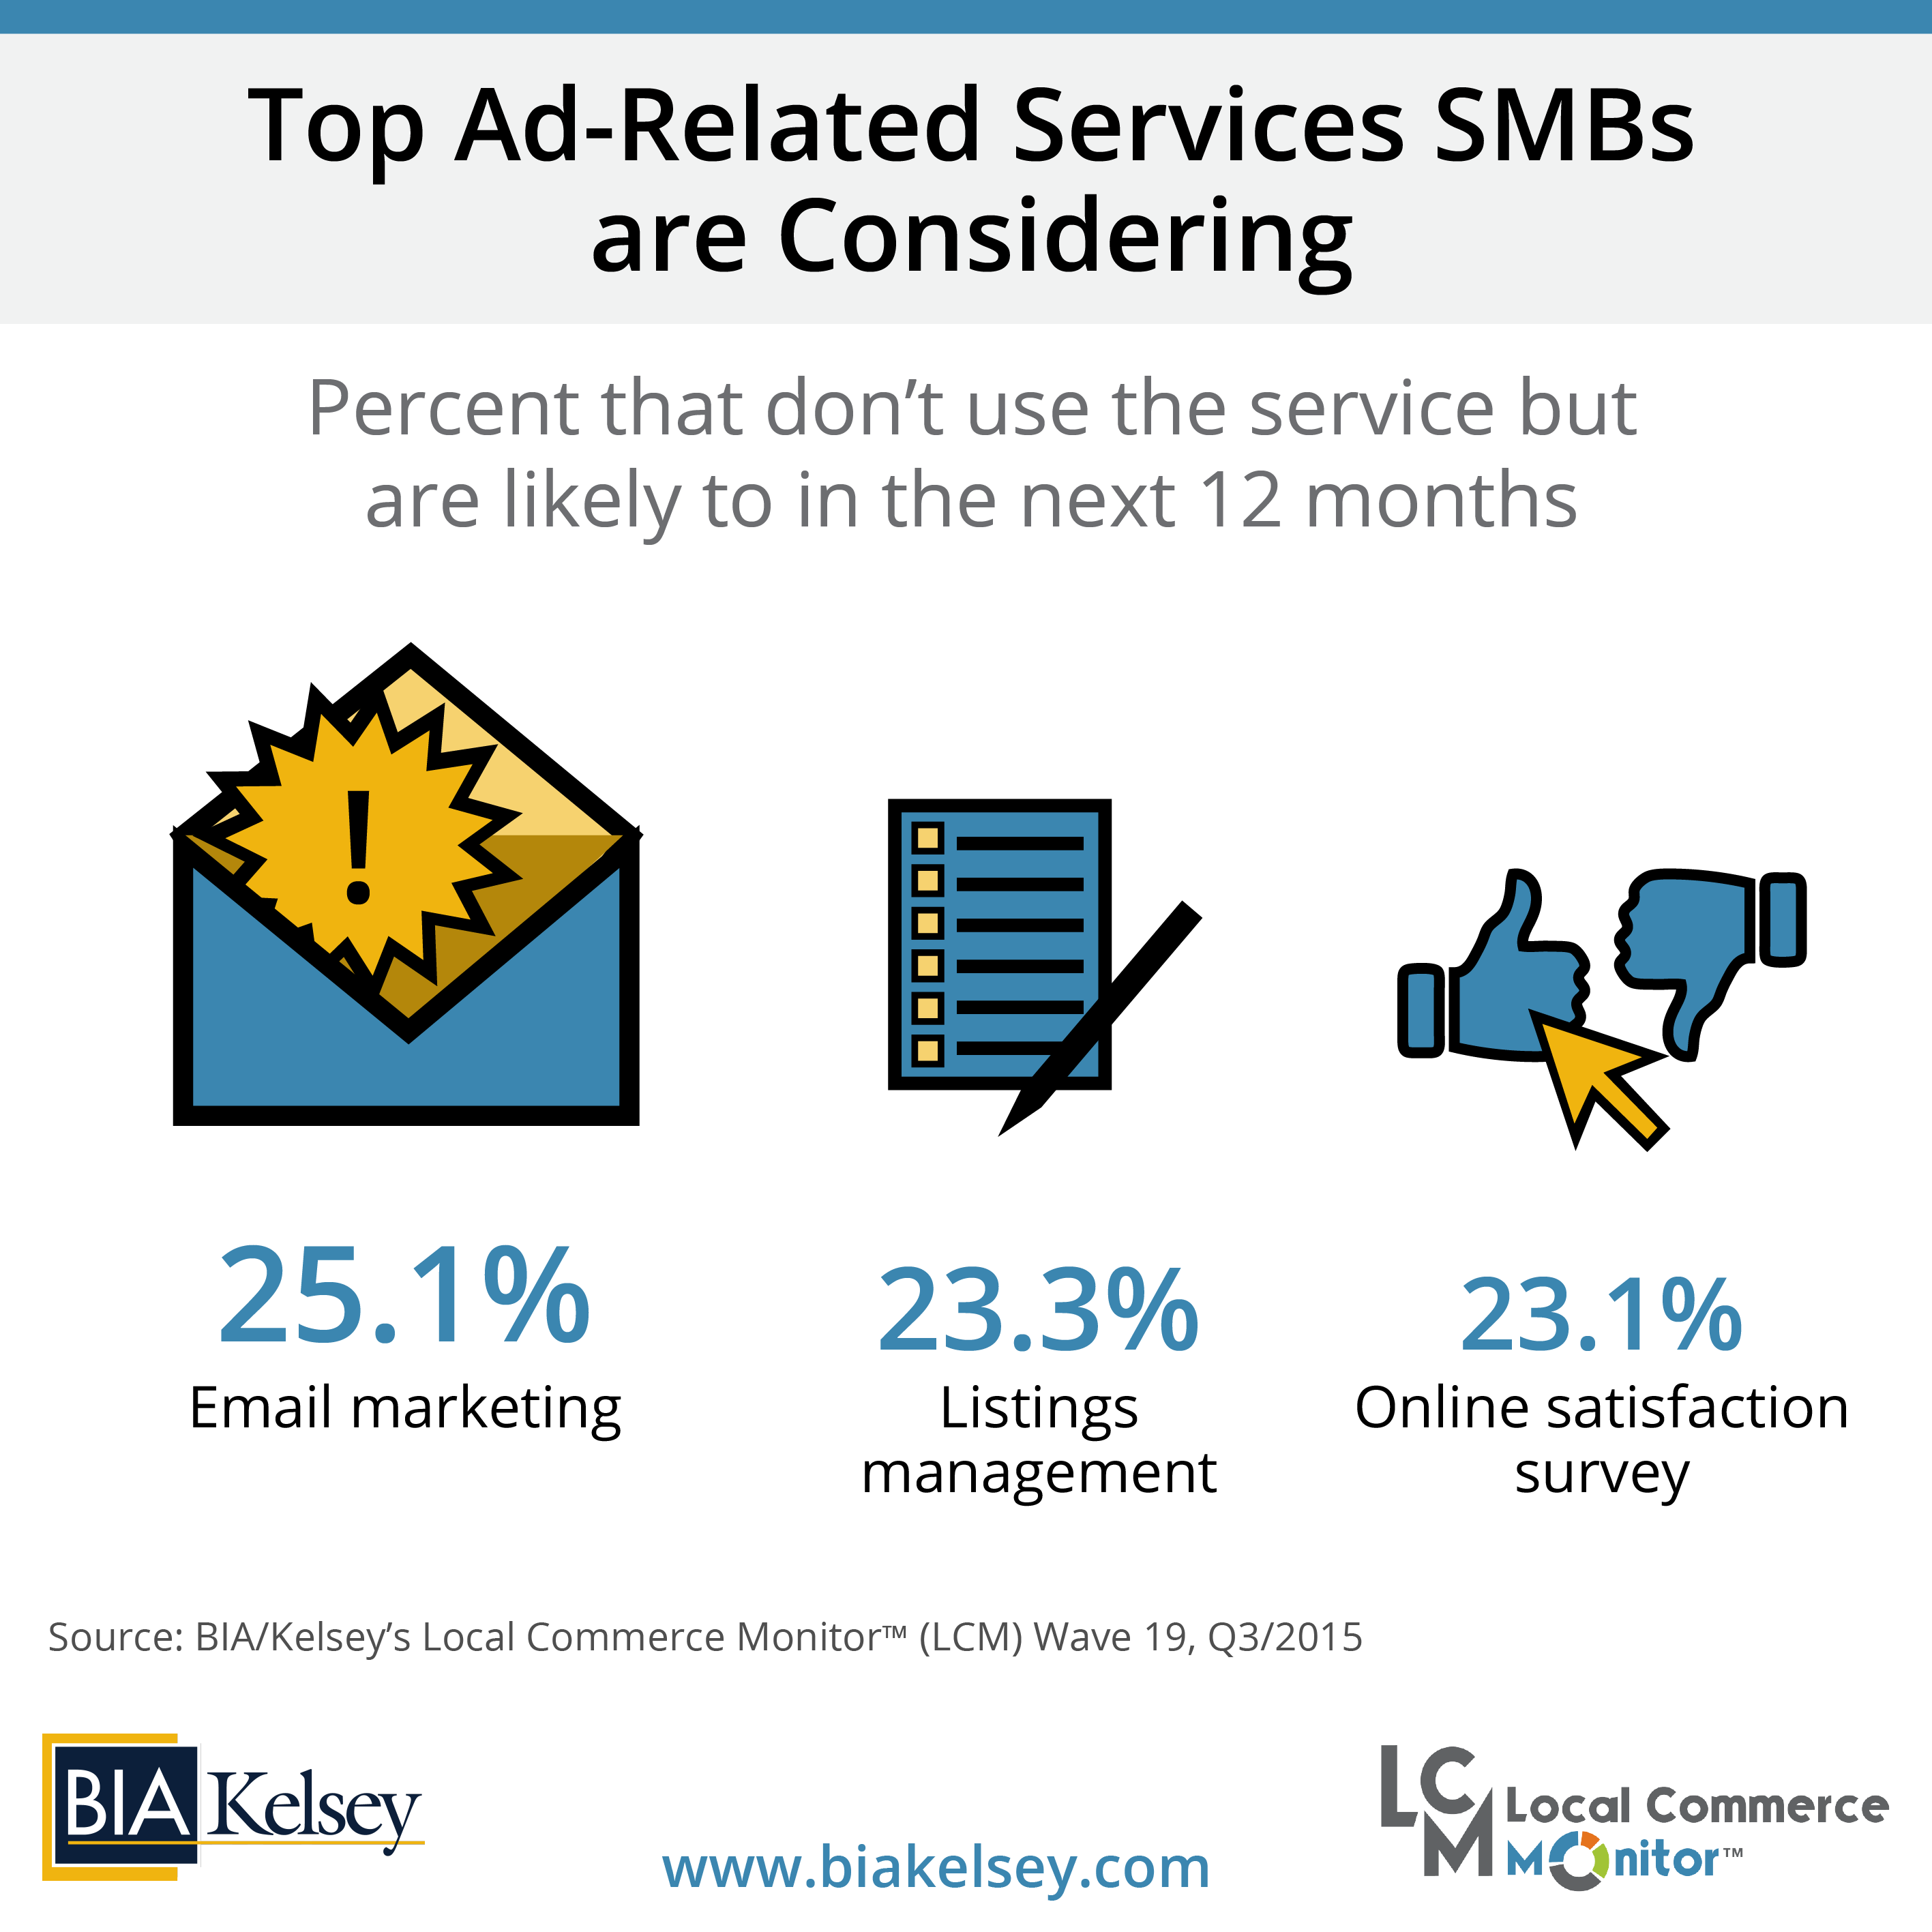 SMB Data Point Of The Week: What Marketing Services Are SMBs Considering?